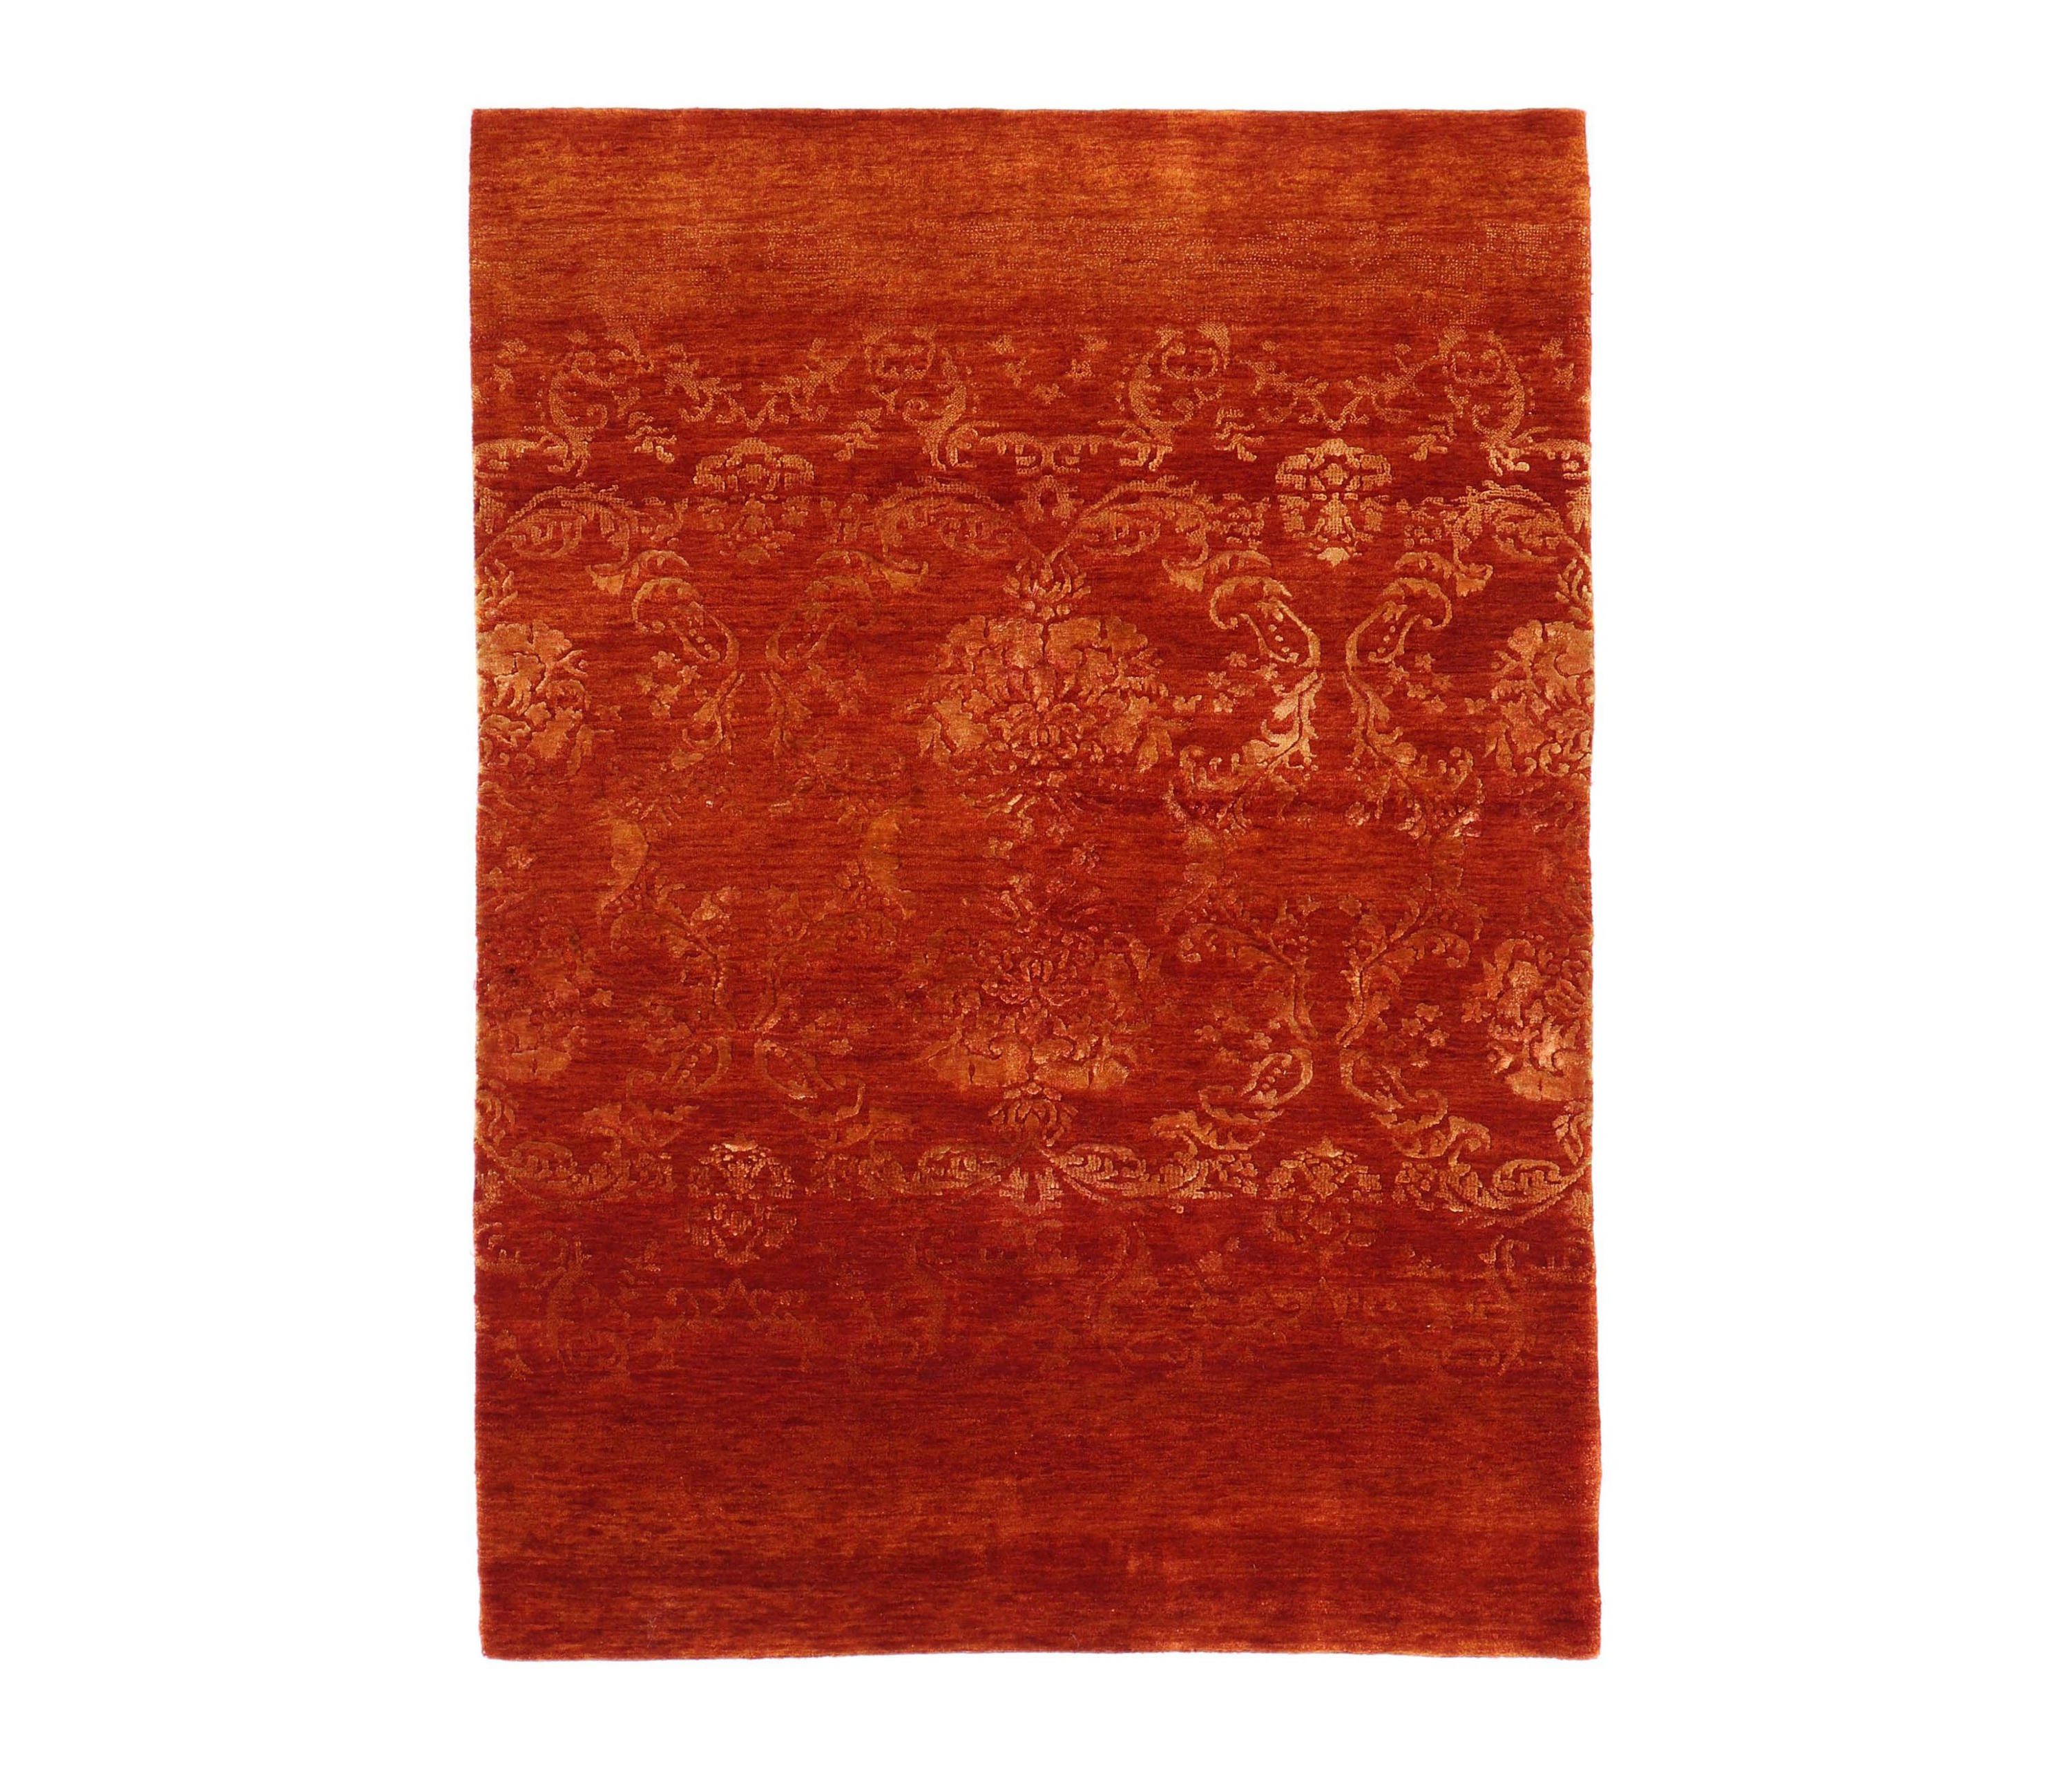 RED WEDDING - Rugs from Knotique | Architonic